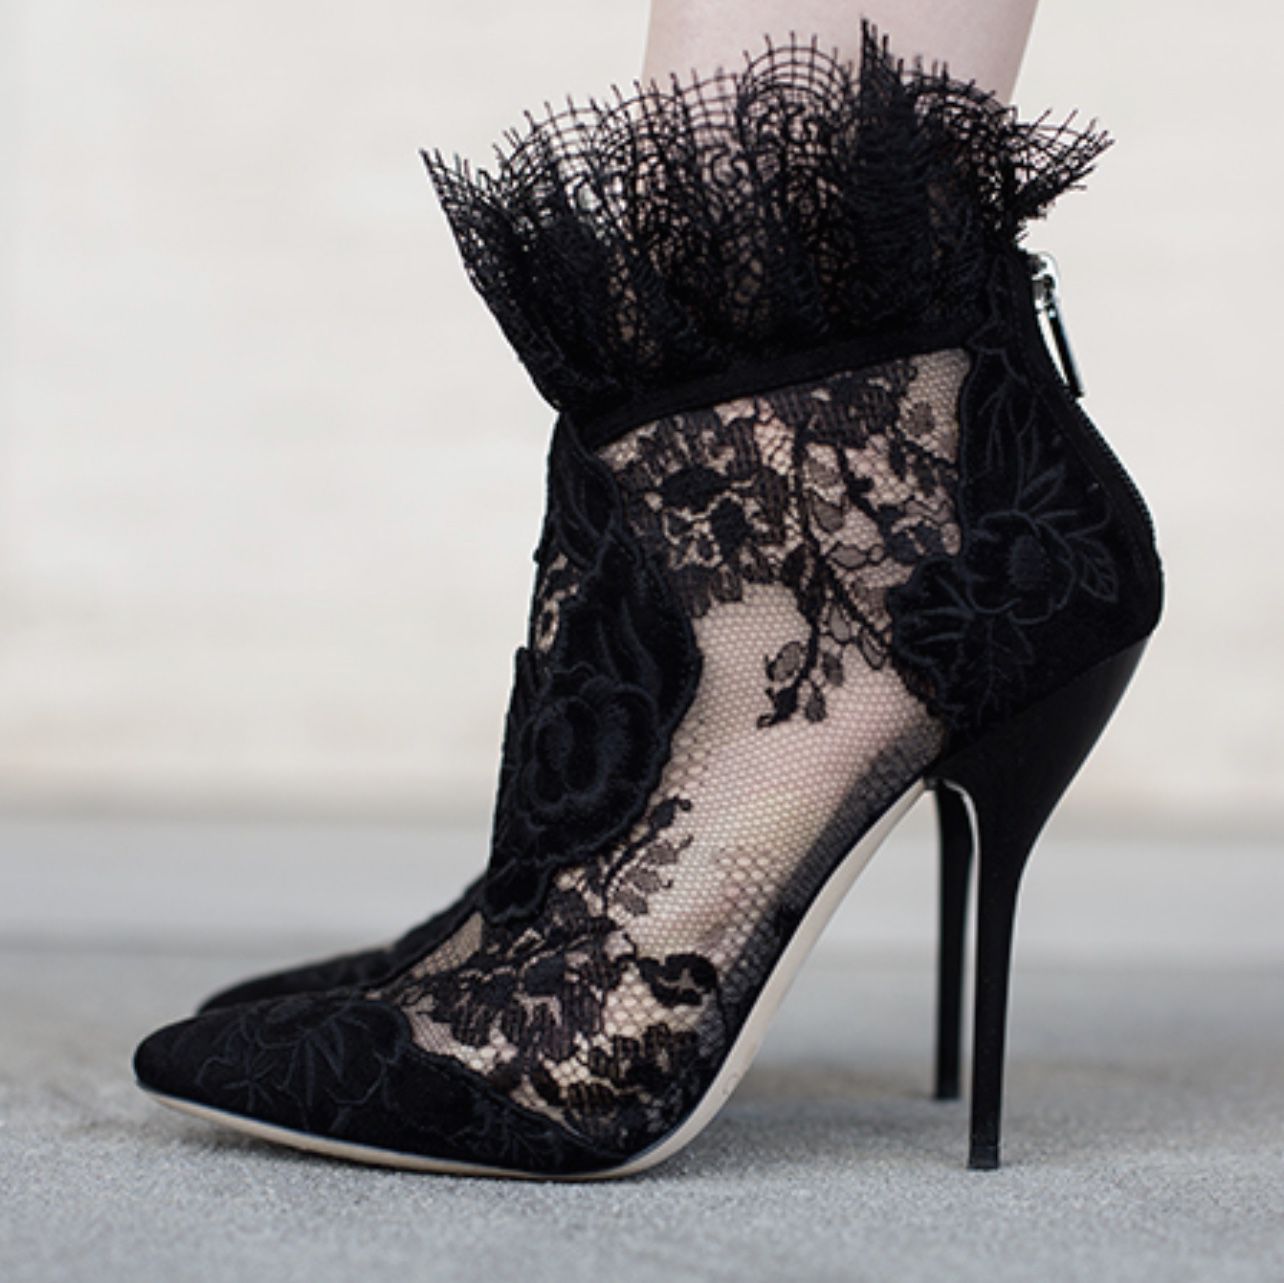 JIMMY CHOO Kamaris Lace Ankle Bootie Black Suede US 7.5 Retail $1395 Ships Fast!